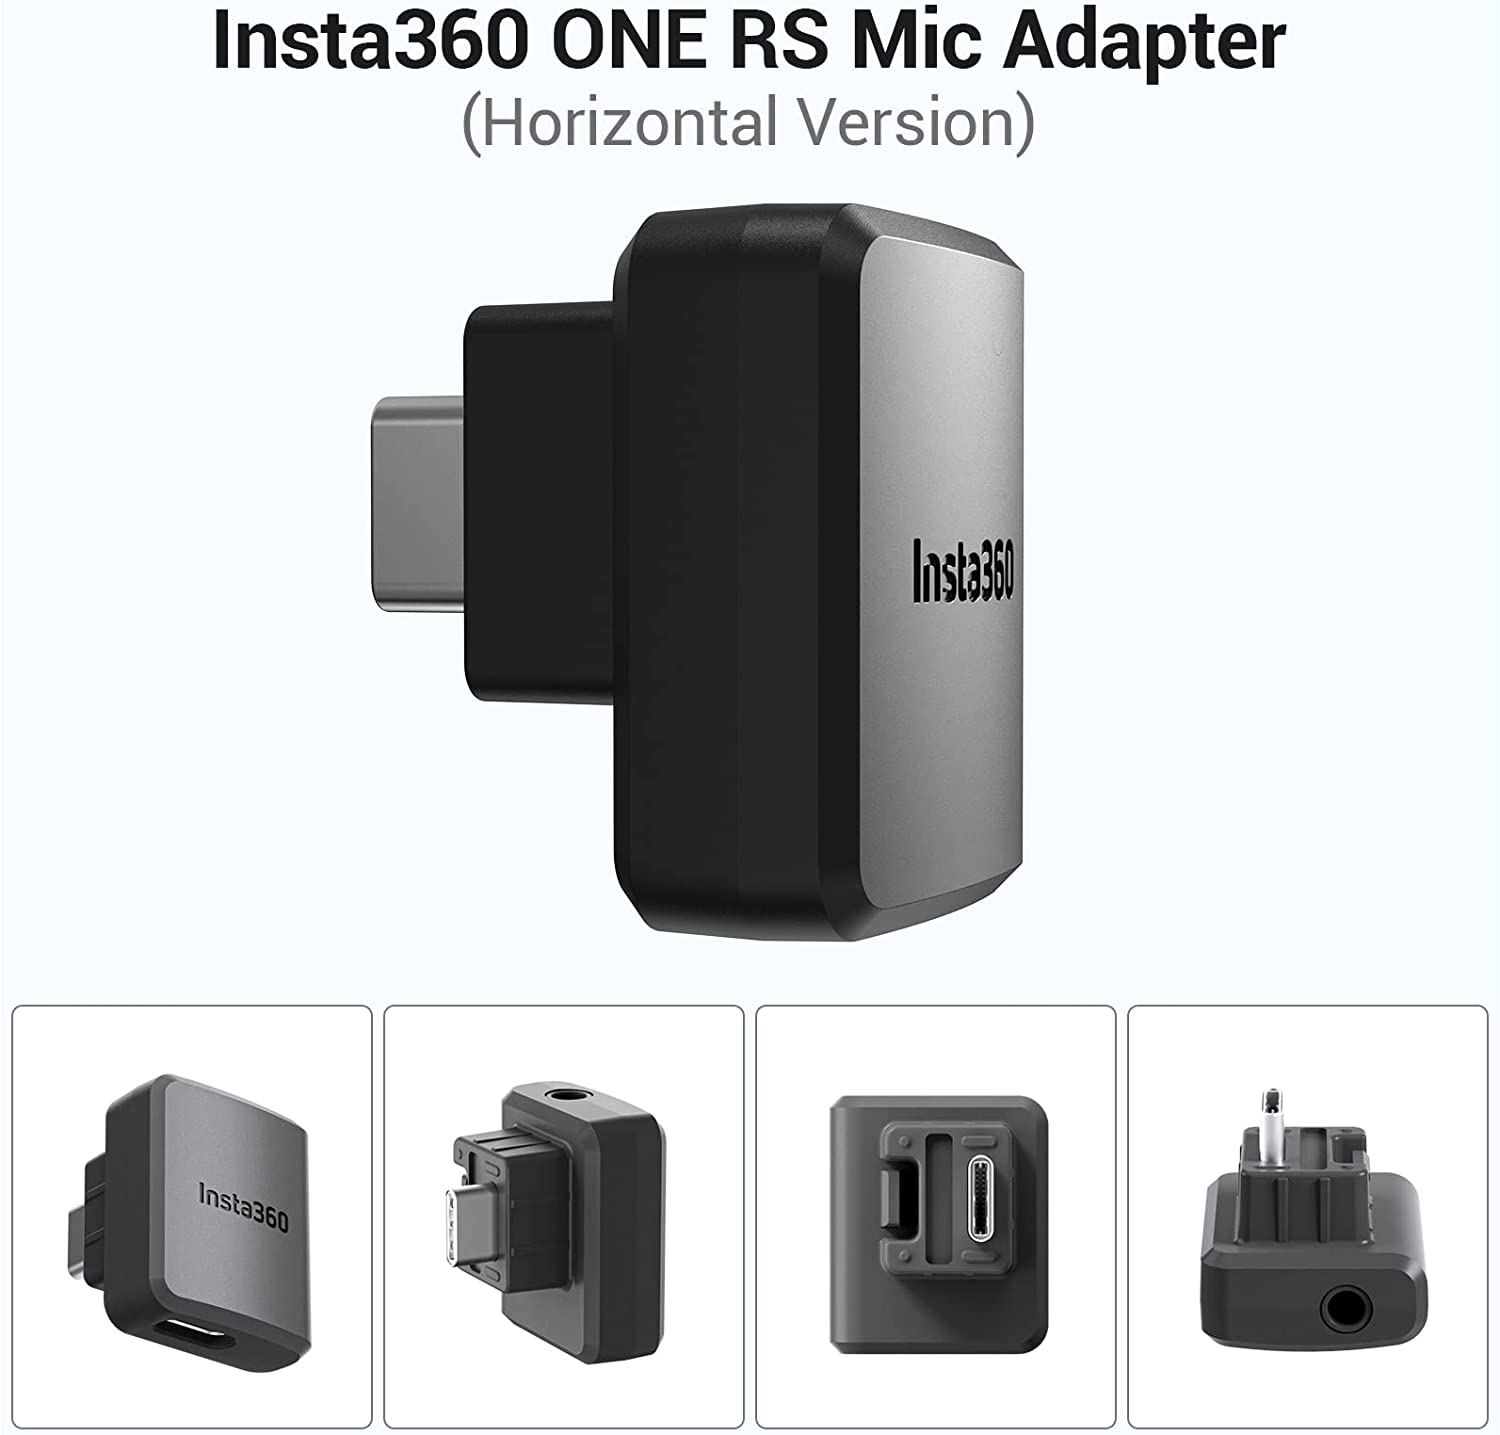 Insta360 ONE RS - Mic Adapter Horizontal Version